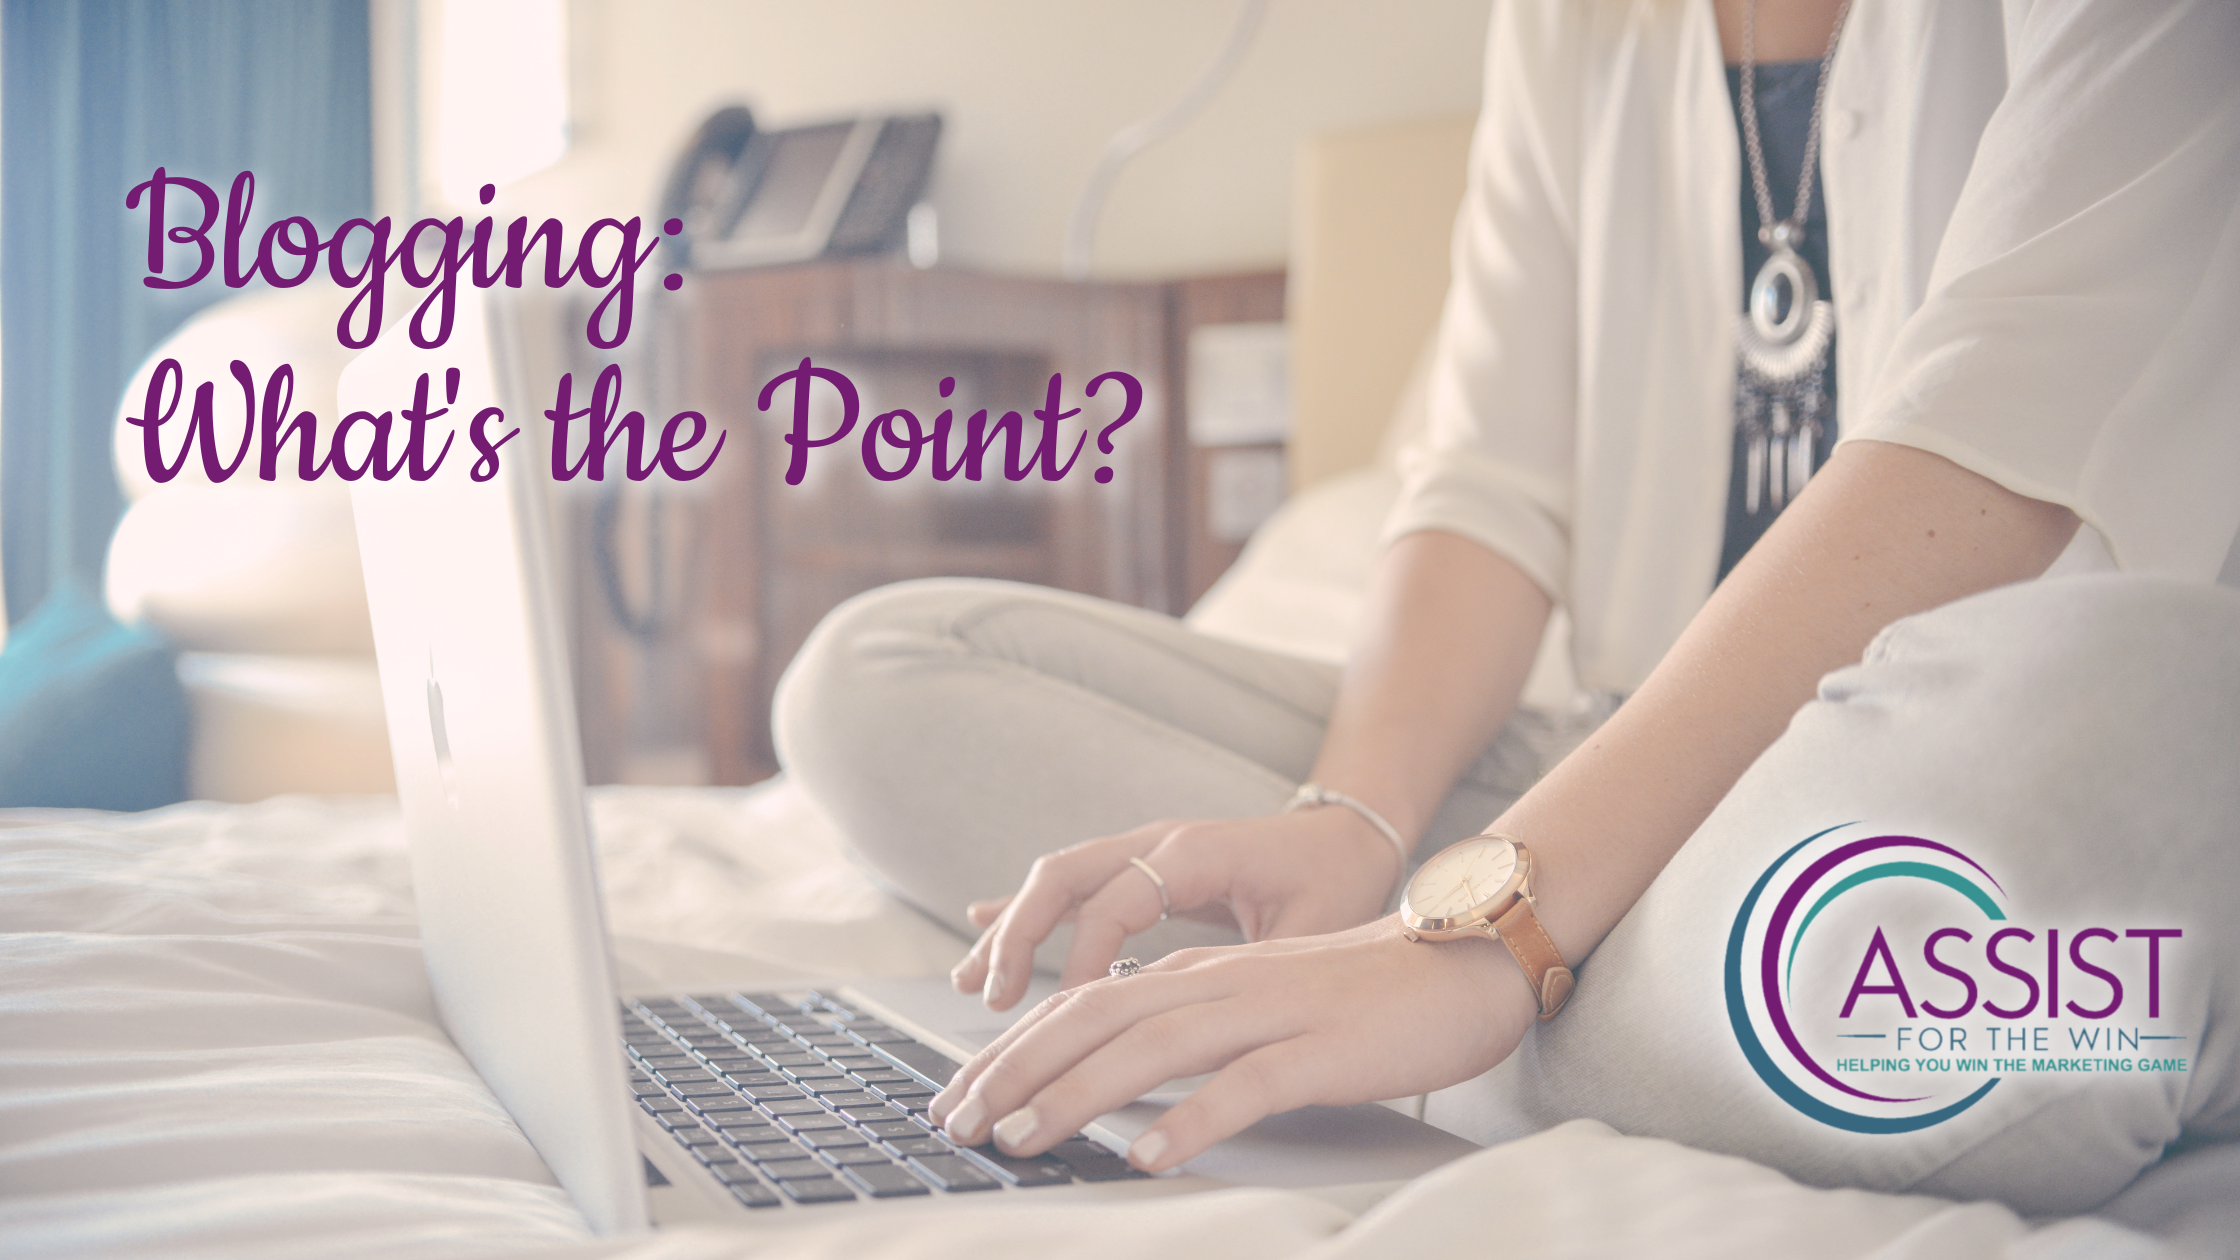 Blogging: What’s the Point?